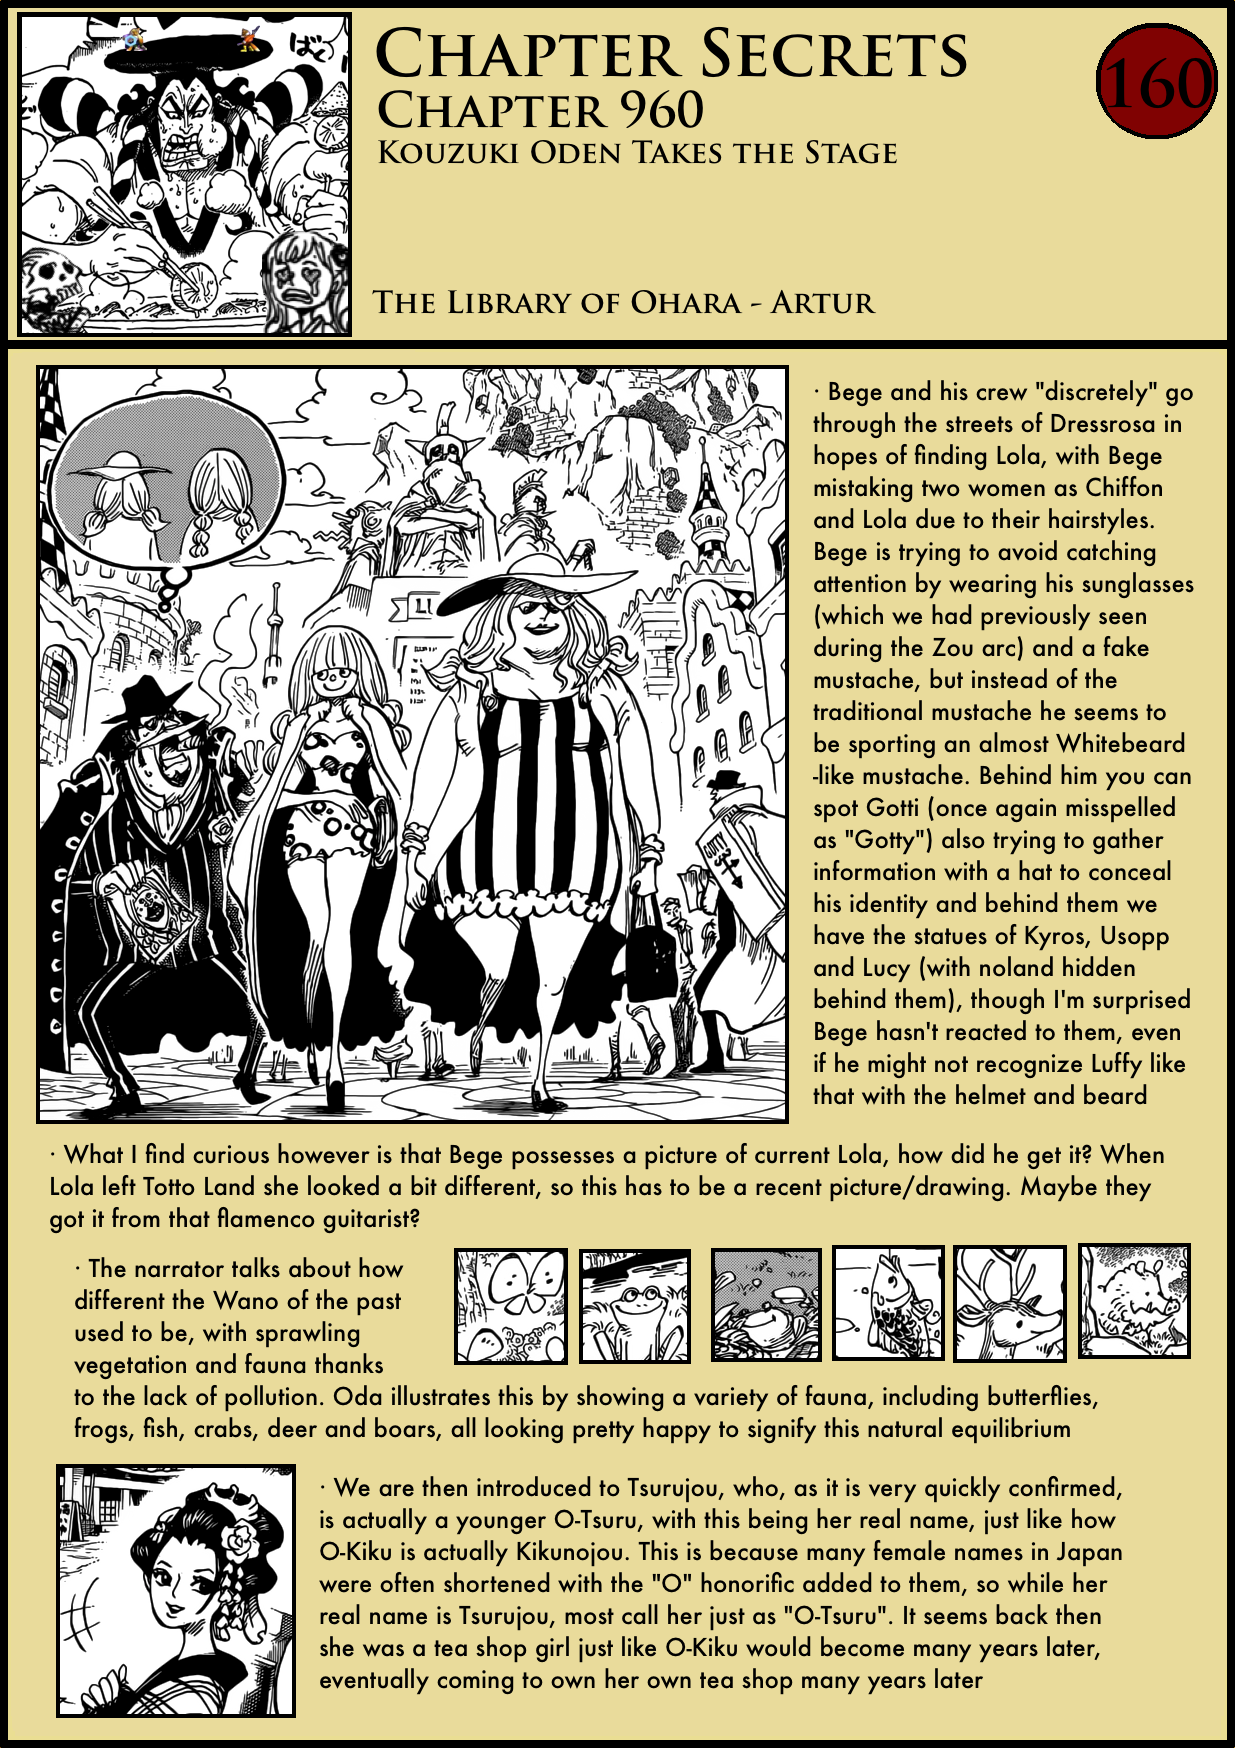 The Ultimate One Piece Timeline (Version 3.0) – The Library of Ohara